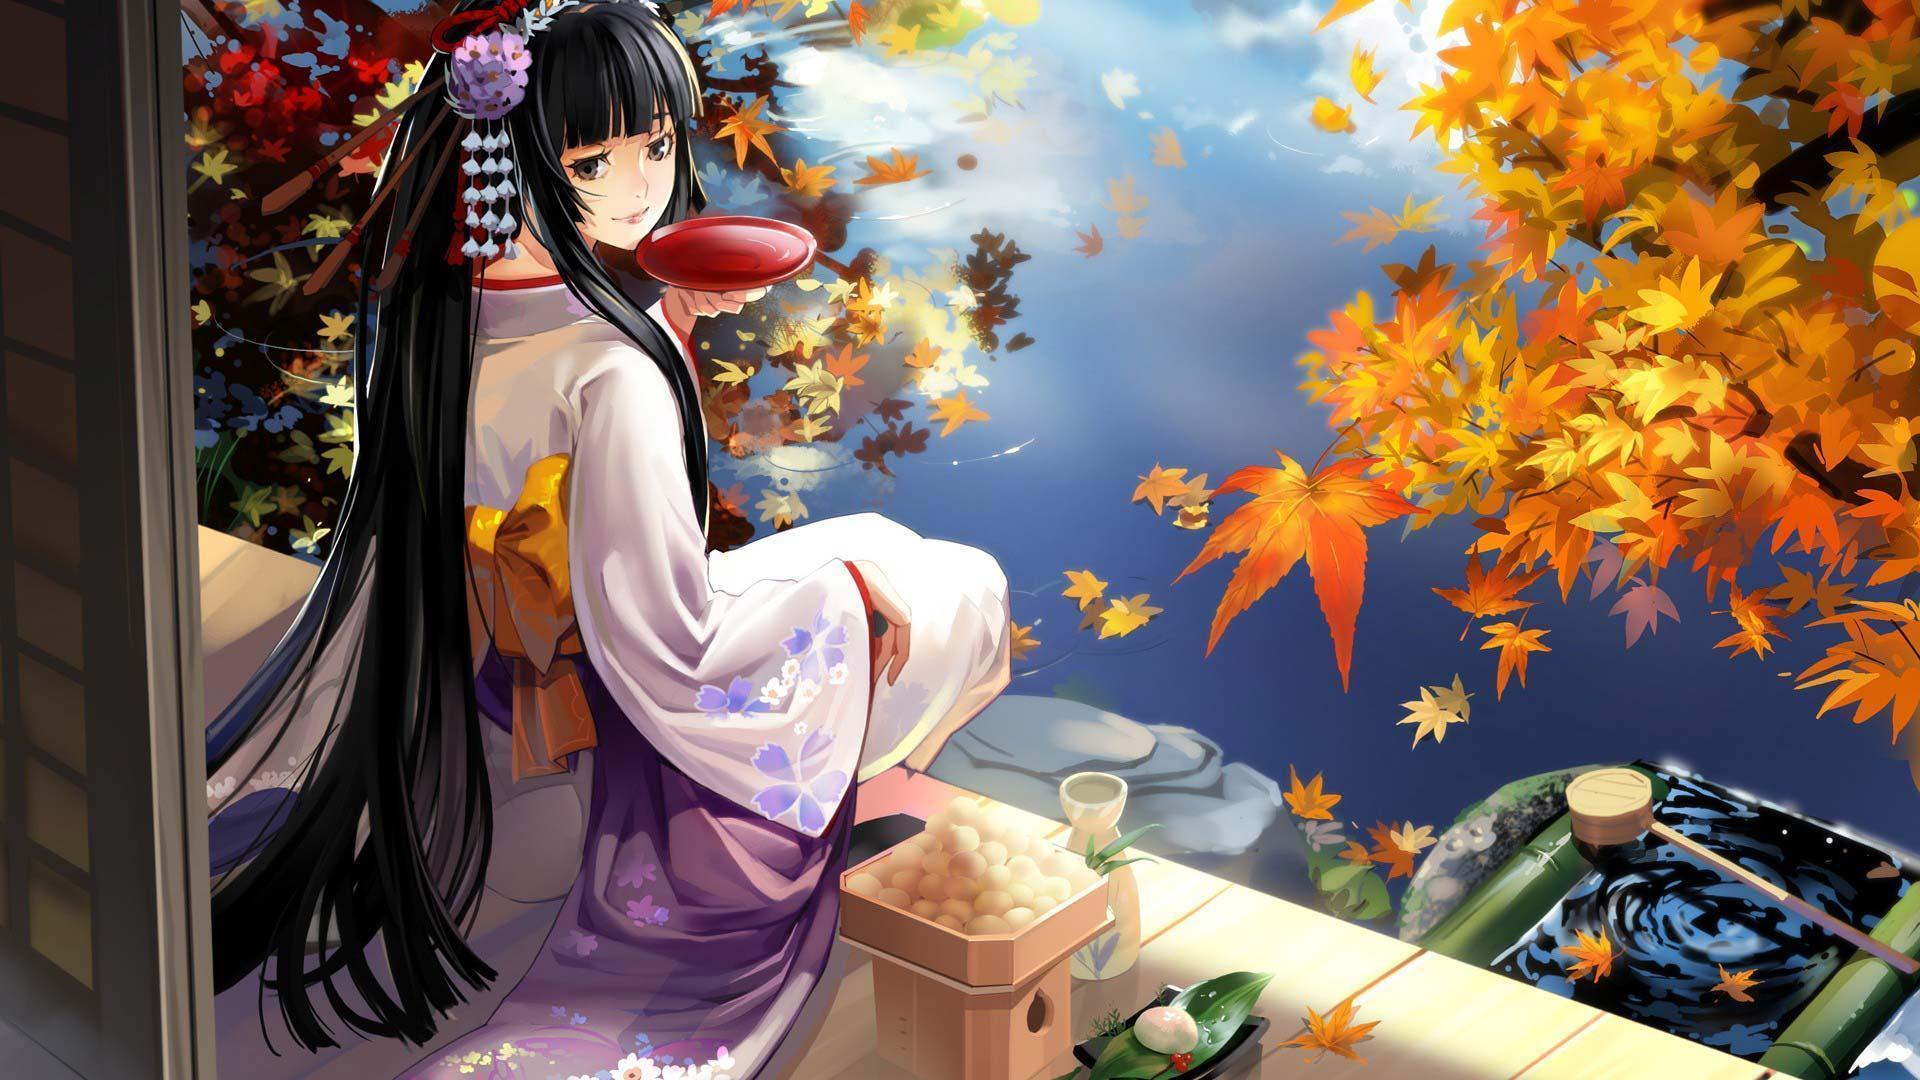 Great Anime 2534 HD Wallpaper Picture. Top Wallpaper Gallery Photo